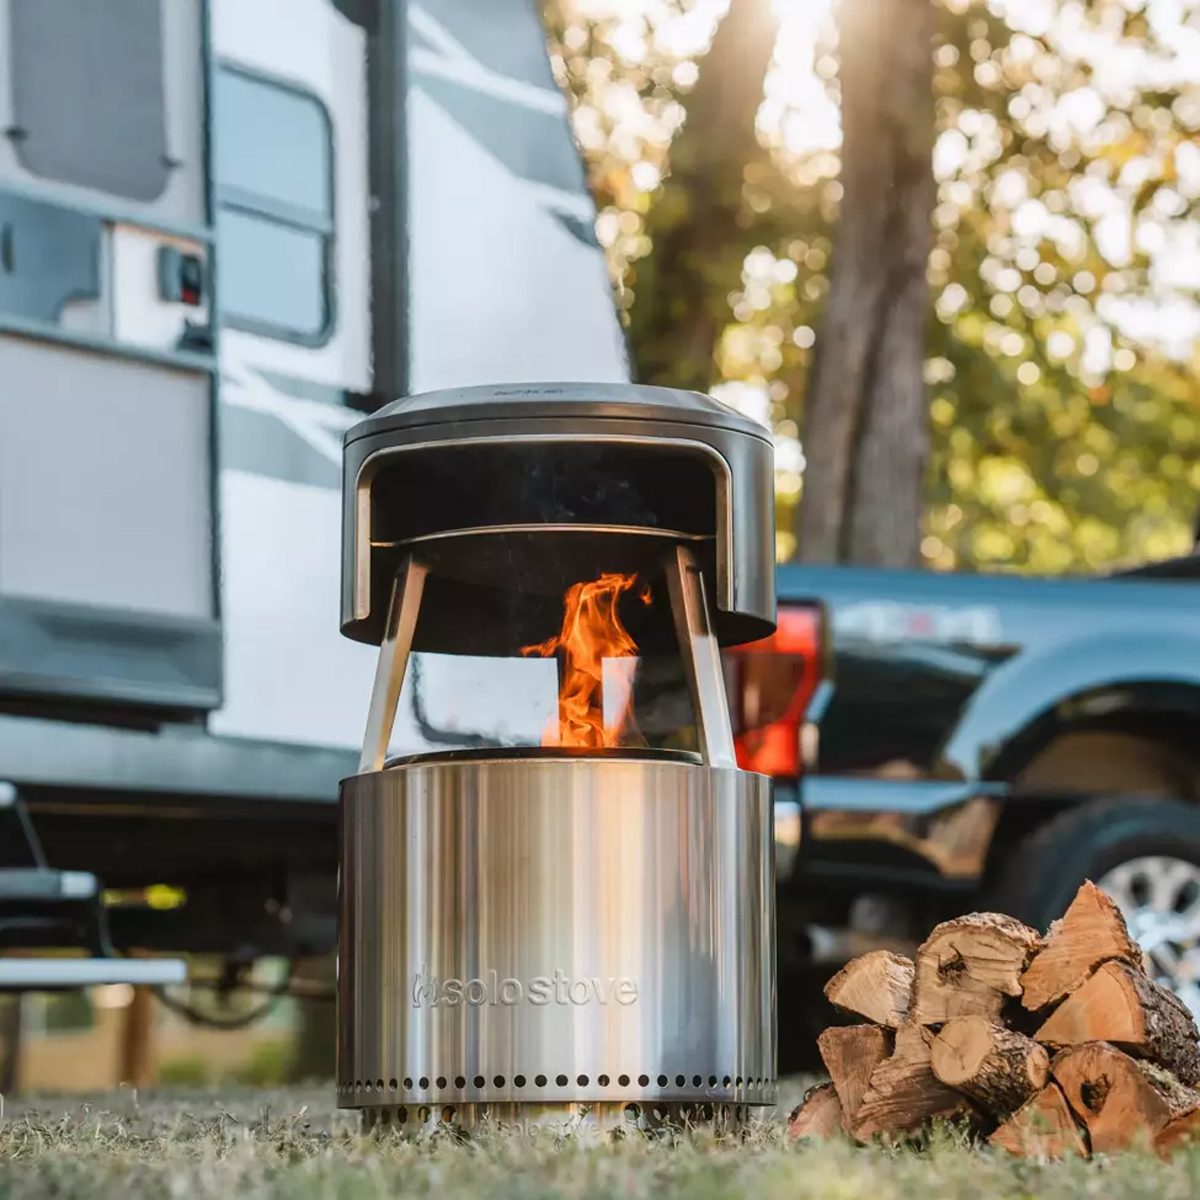 Solo Stove Just Launched a Portable Pizza Oven, And It's on Sale Right Now